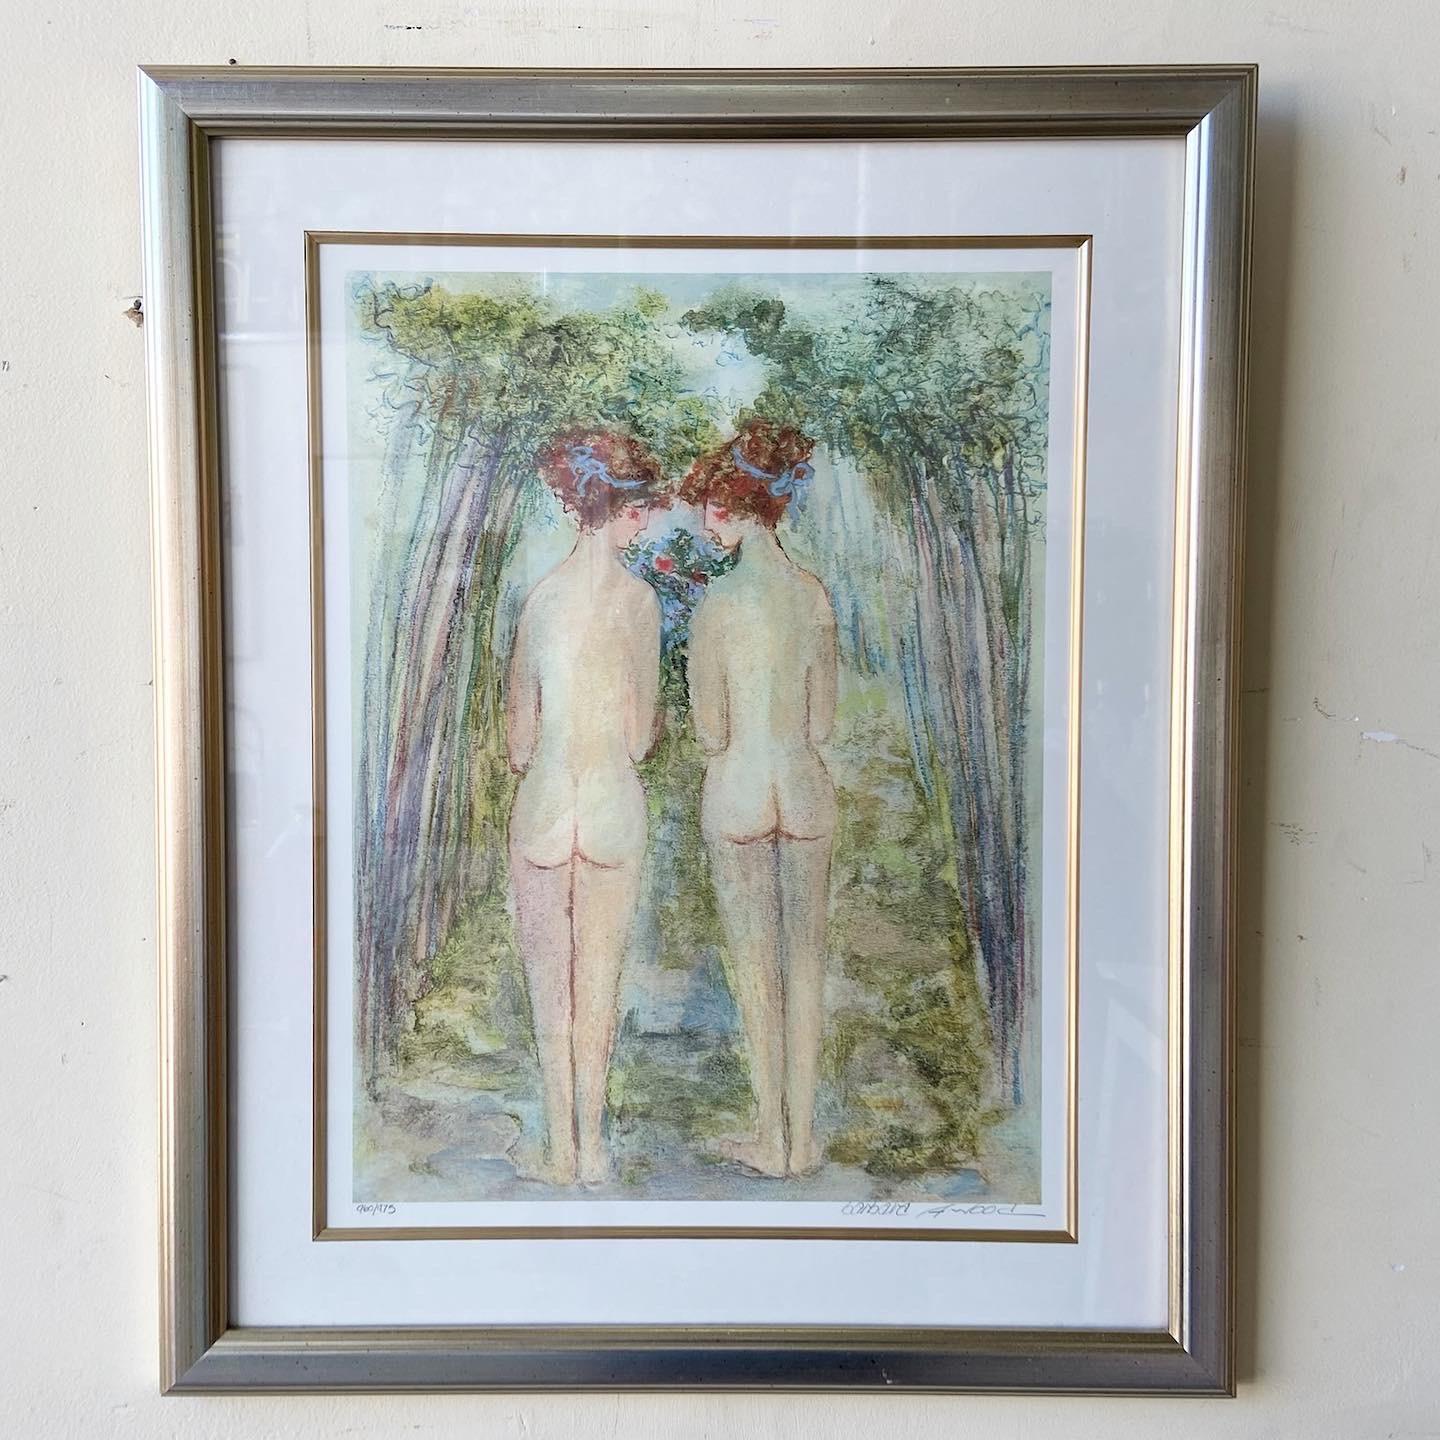 Exceptional framed/signed print by Barbara A Wood. Subject is two nude girls walking side by side in the forest.
  